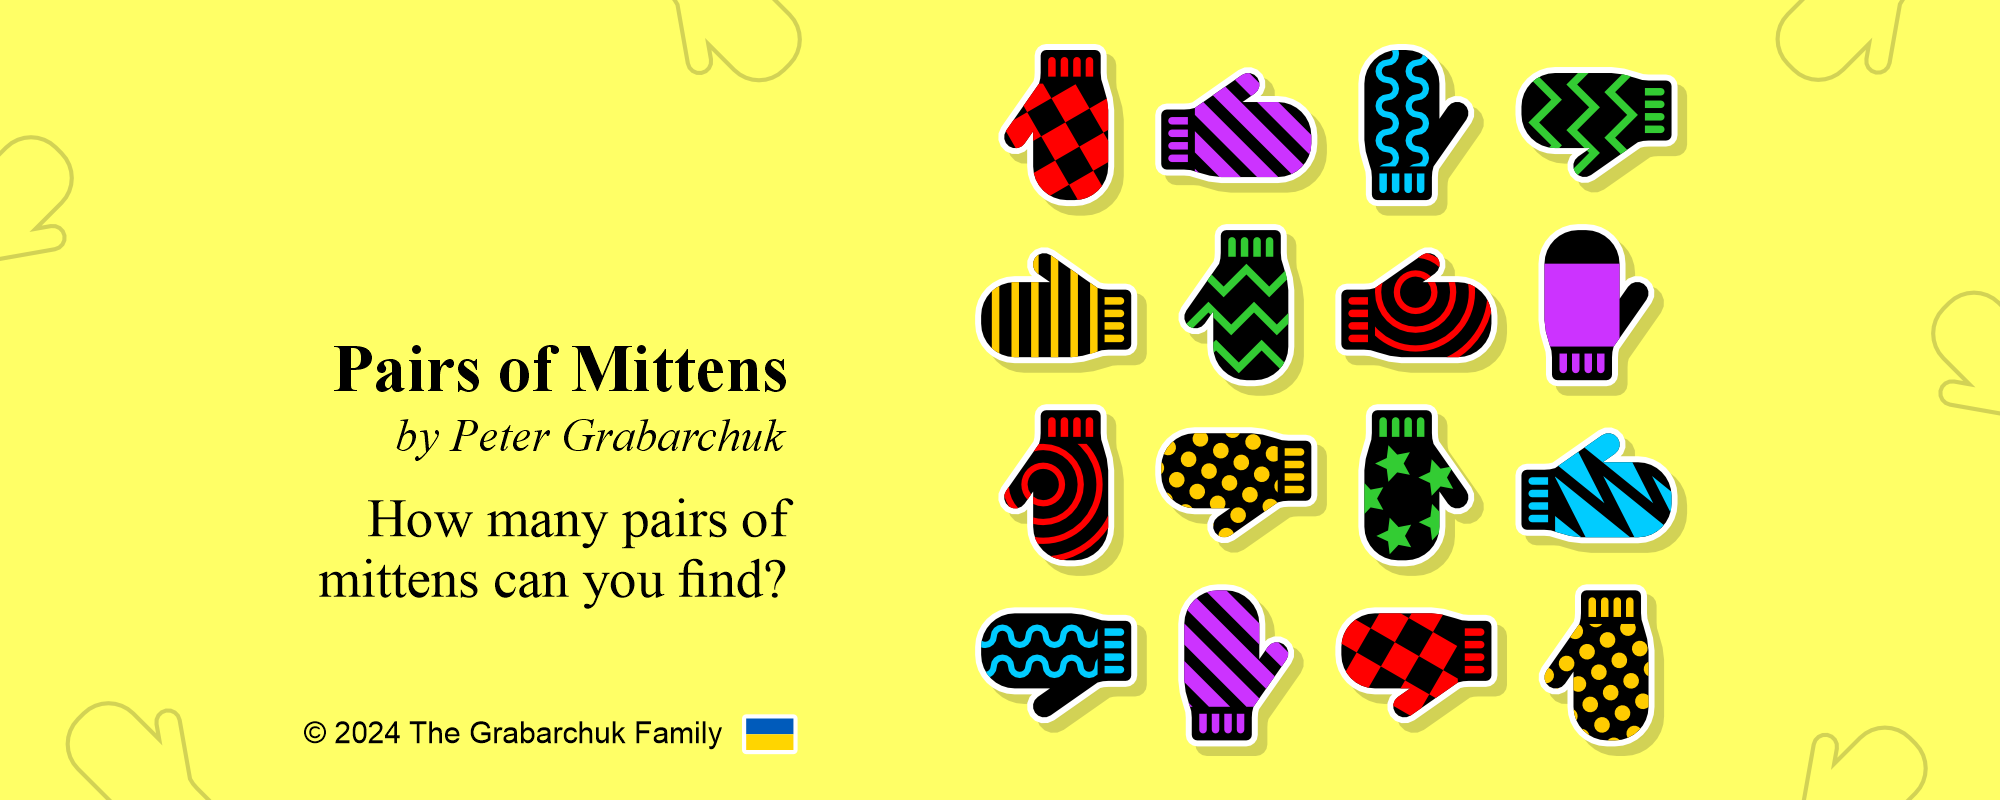 Pairs of Mittens by Peter Grabarchuk